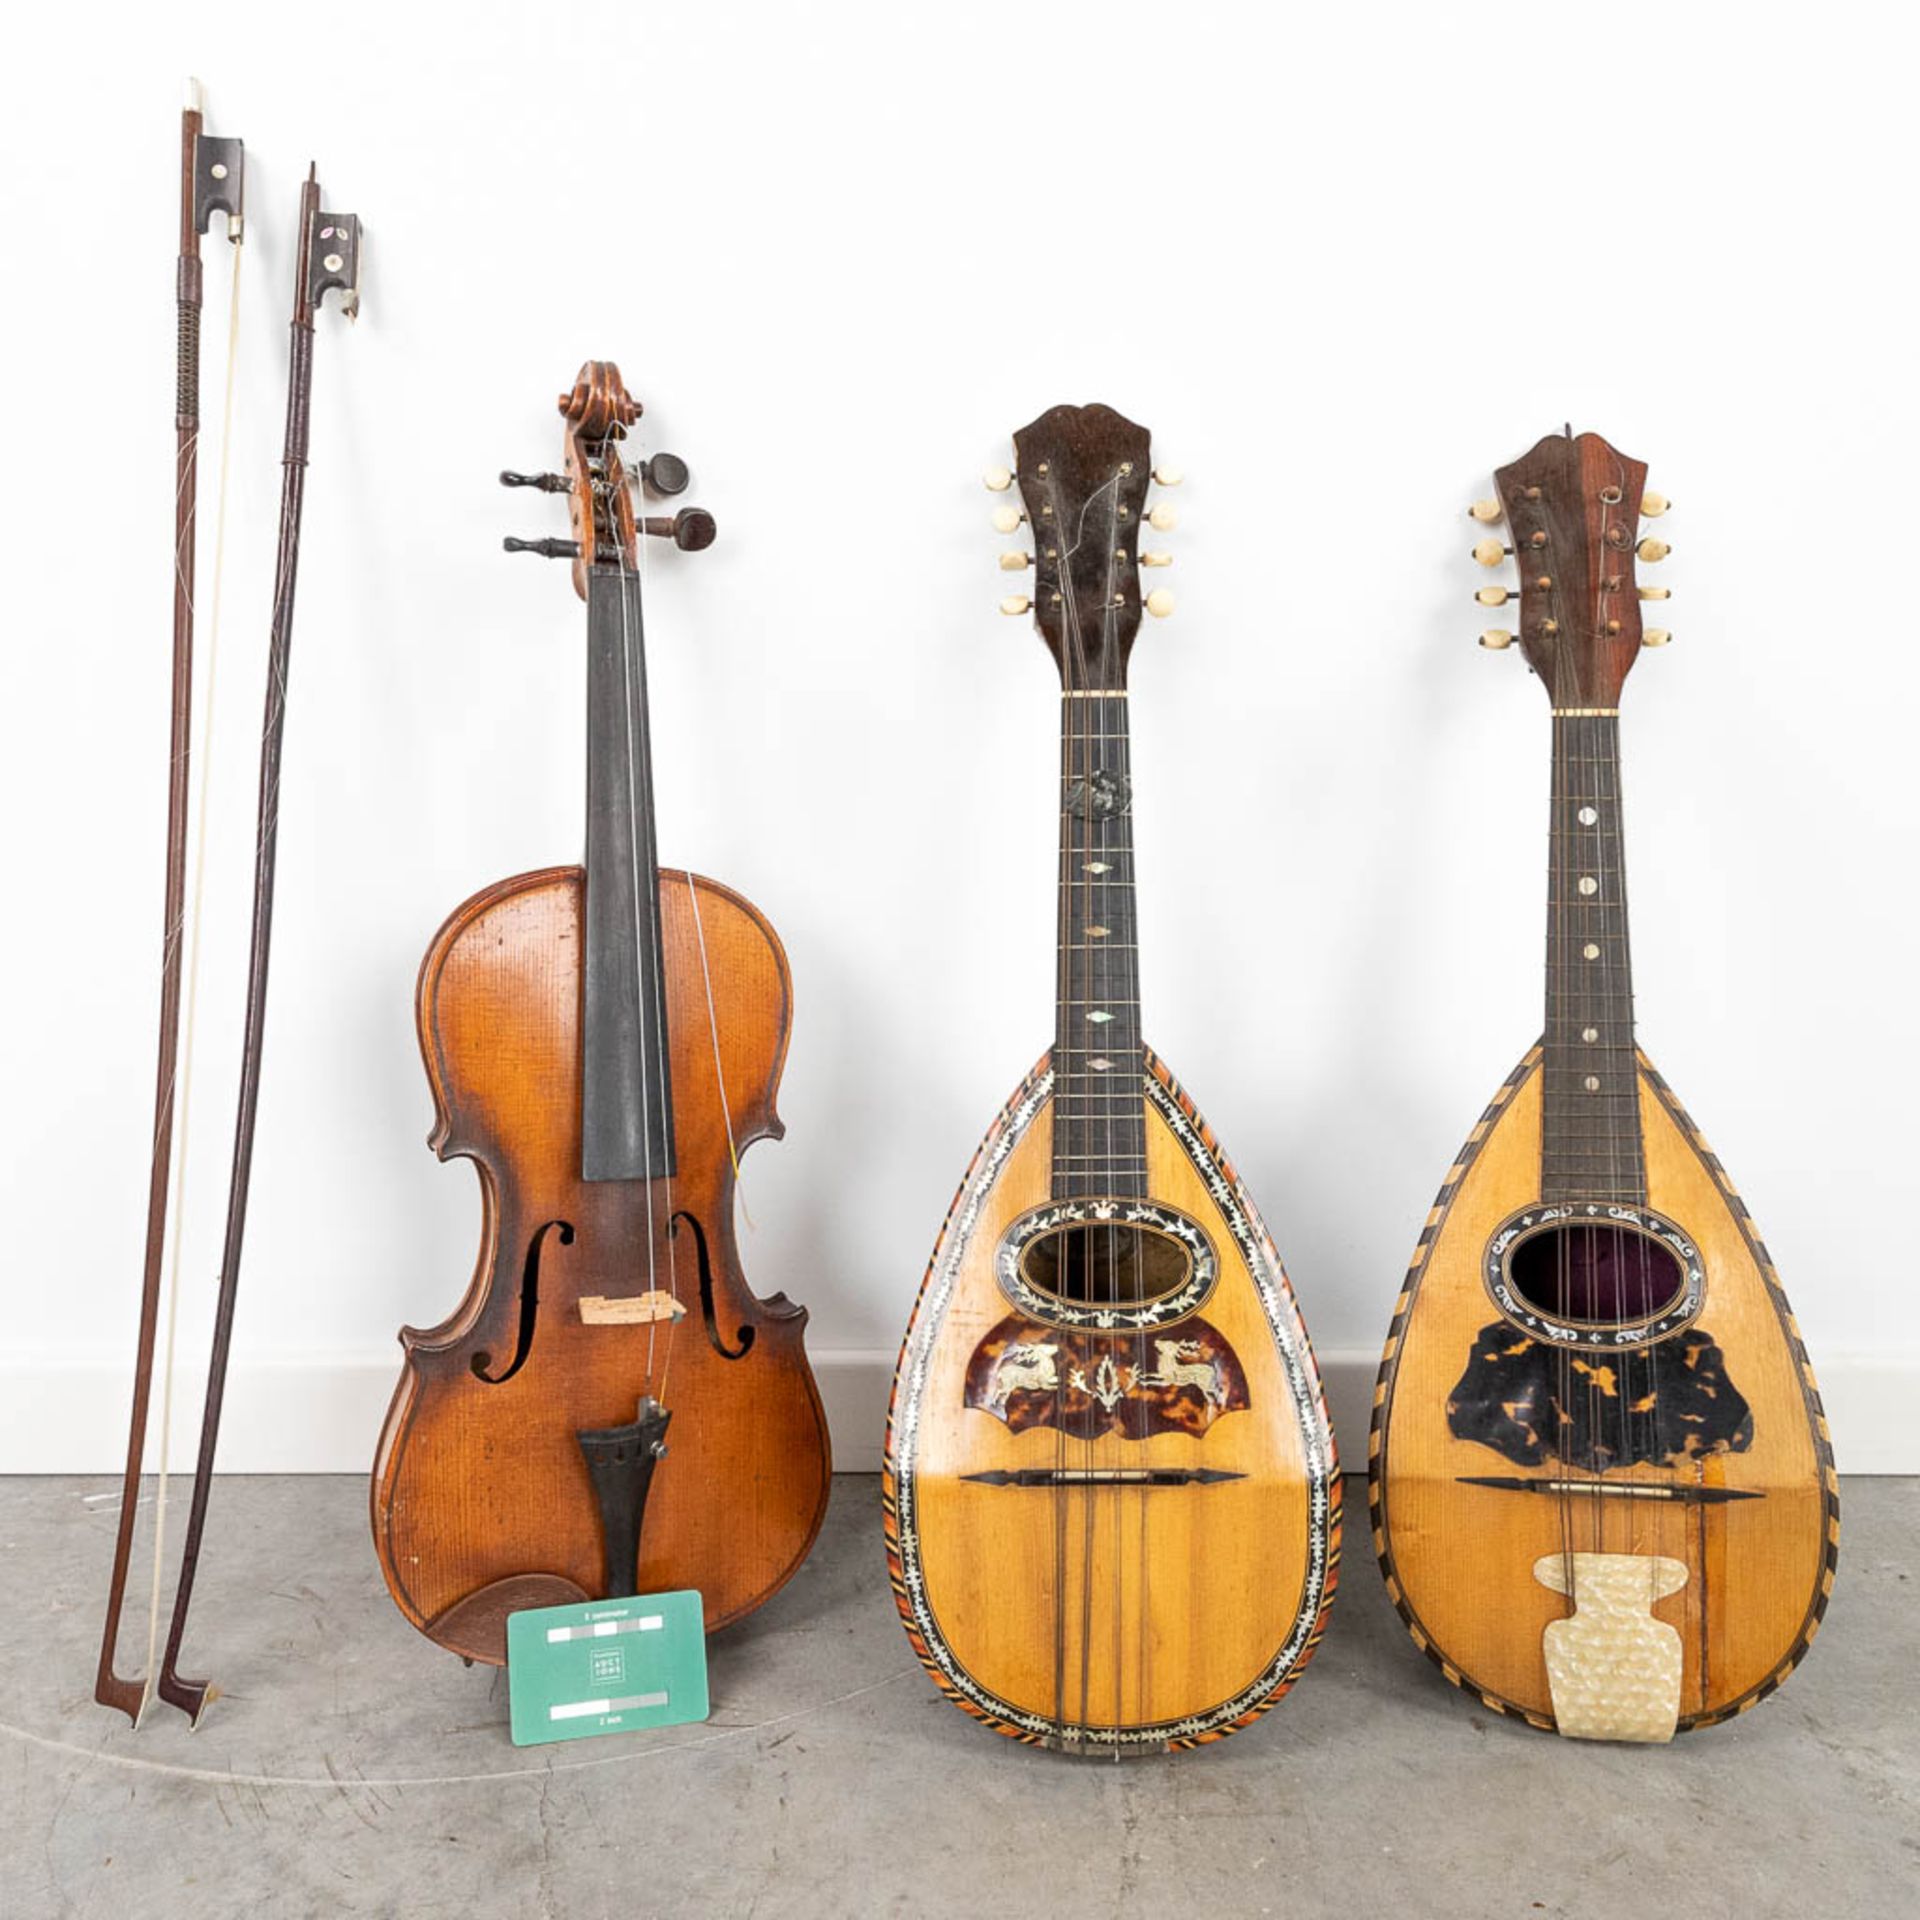 A collection of 3 musical instruments: 2 mandolines and a violin, after a model made by Stradivarius - Image 56 of 56